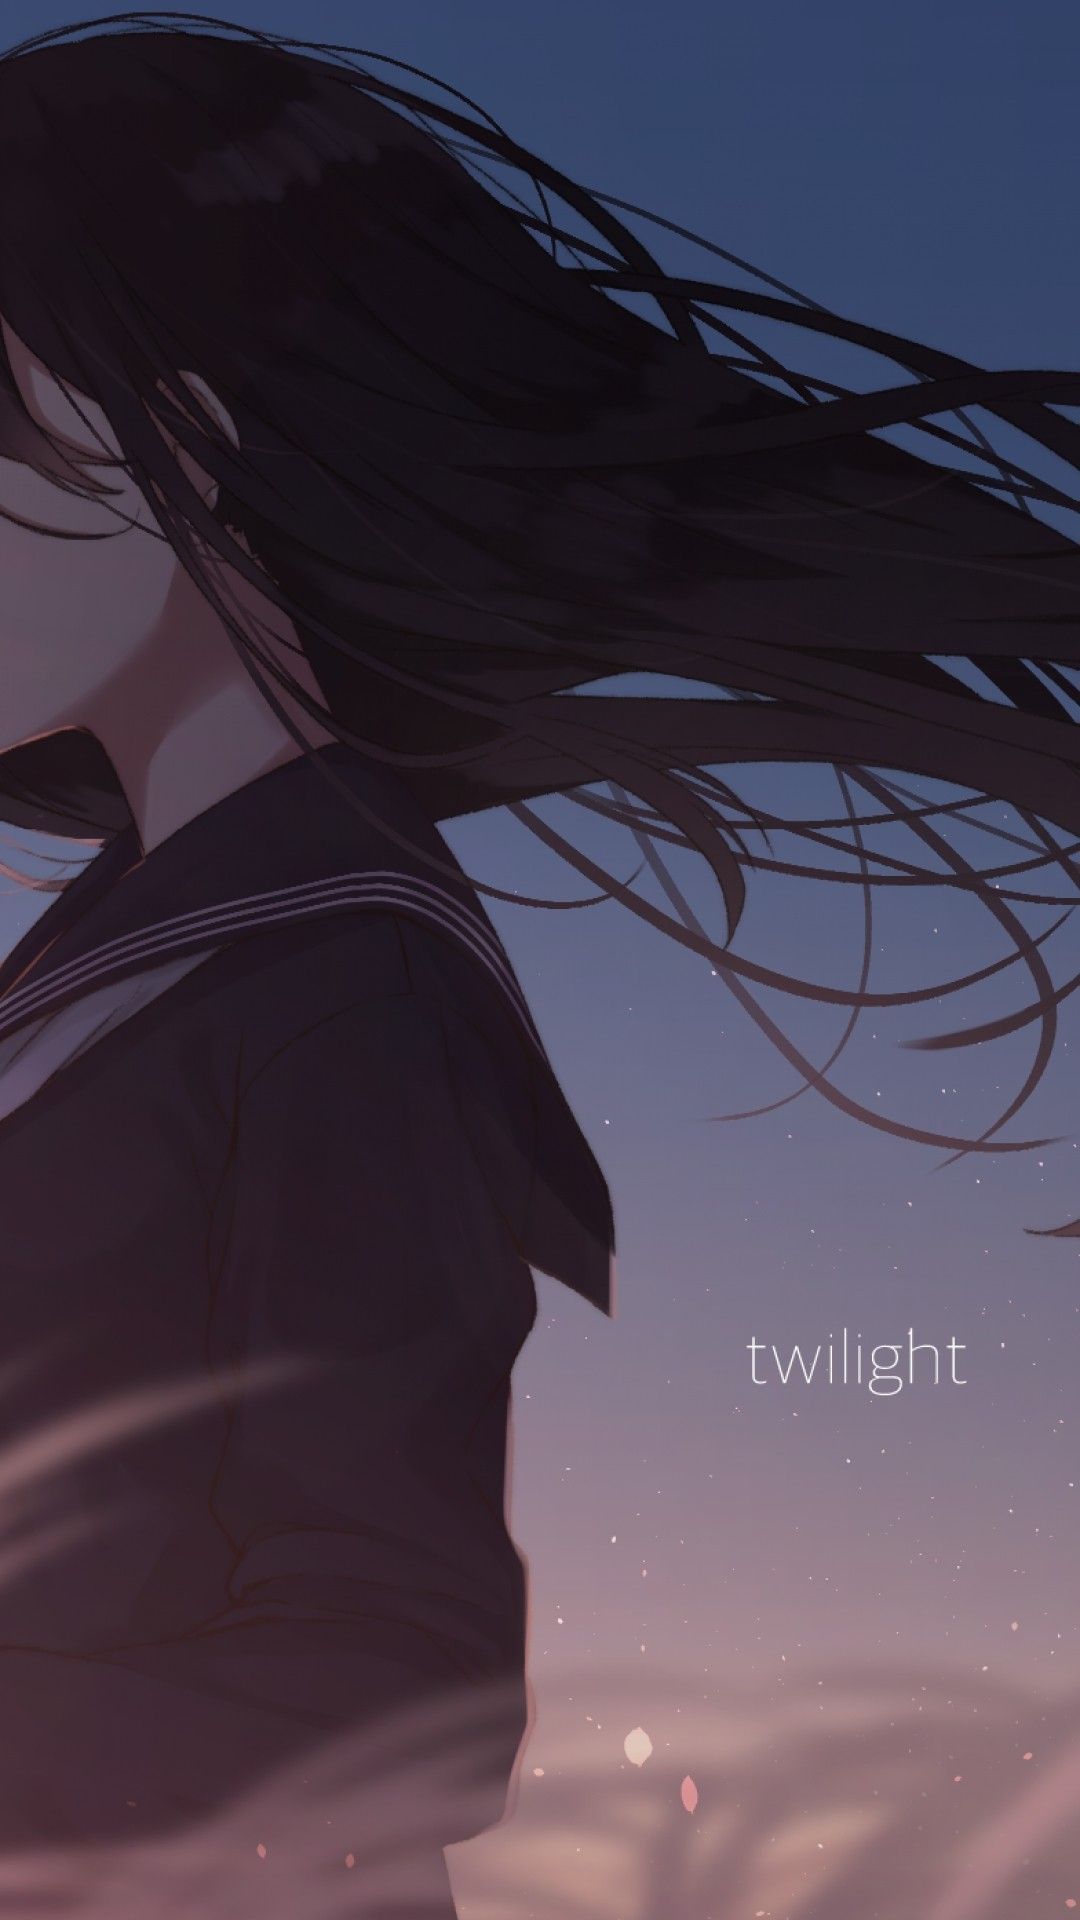 Anime girl with long hair in the wind, twiight background - Anime girl